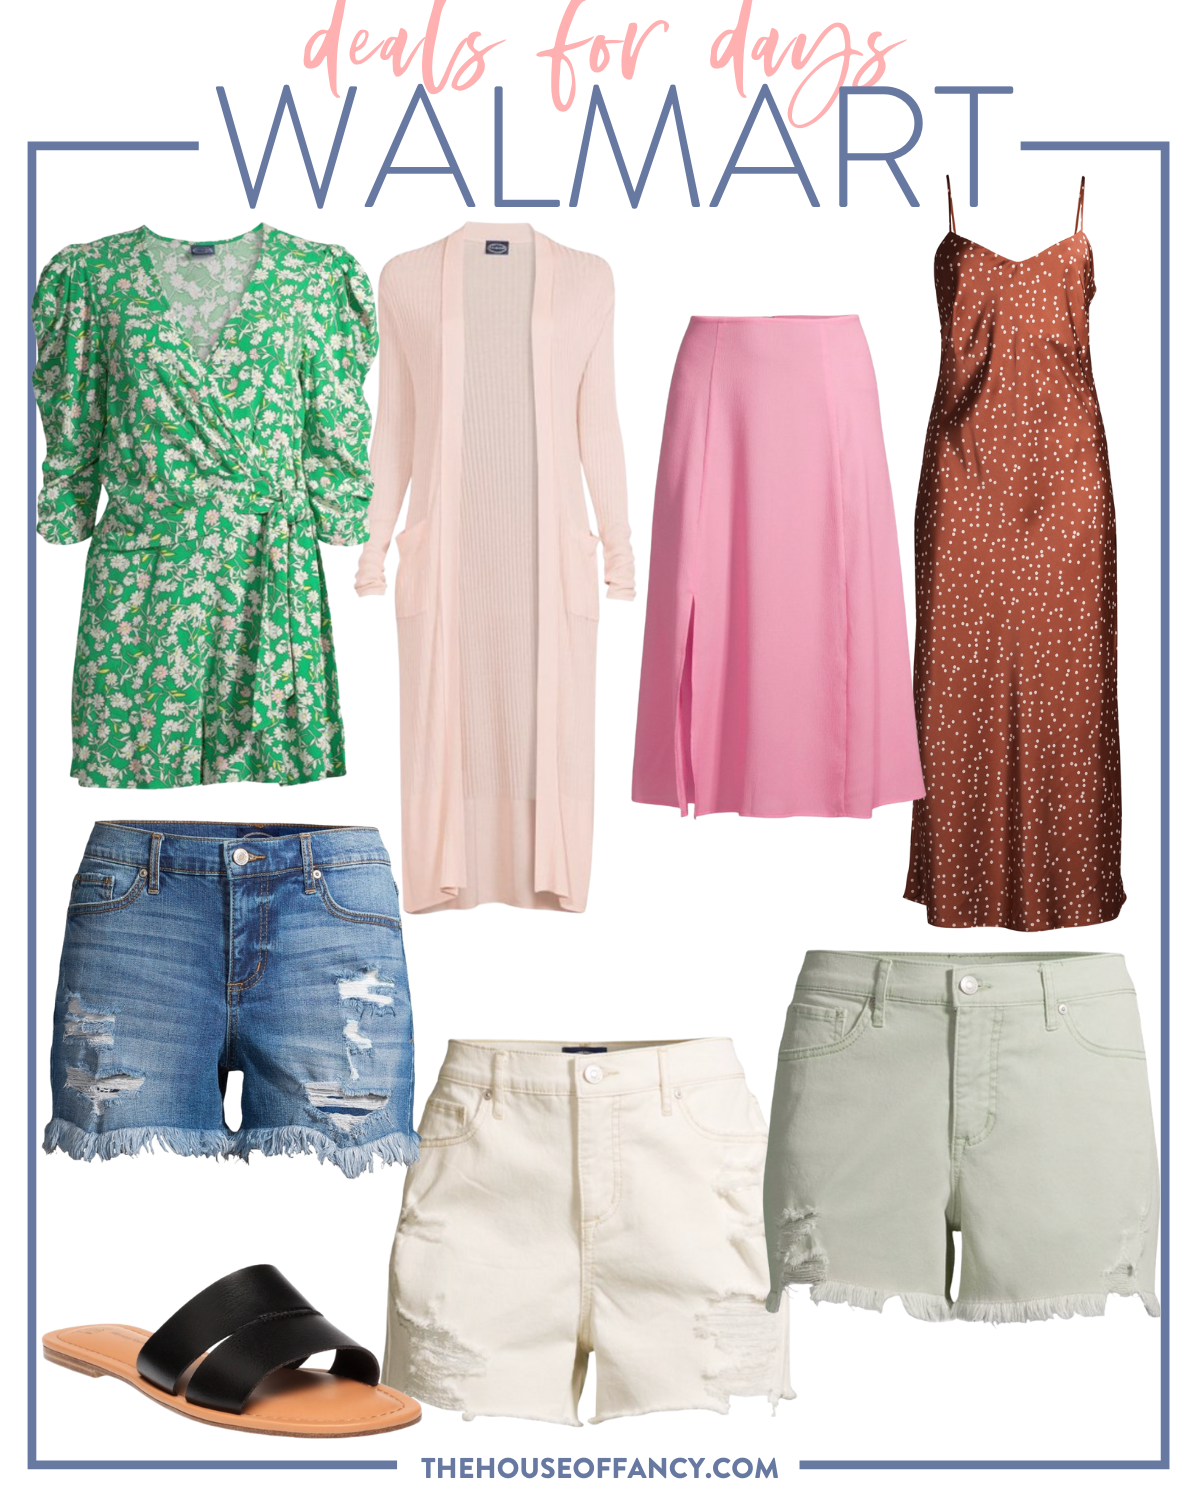 Walmart Deals for Days by popular Houston fashion blog, The House of Fancy: collage image of a green and white print puff sleeve romper, pink duster sweater, pink skirt, silk brown and white dot maxi dress, fray hem denim shorts, fray hem grey shorts, distressed khaki shorts, and black strap sandals. 